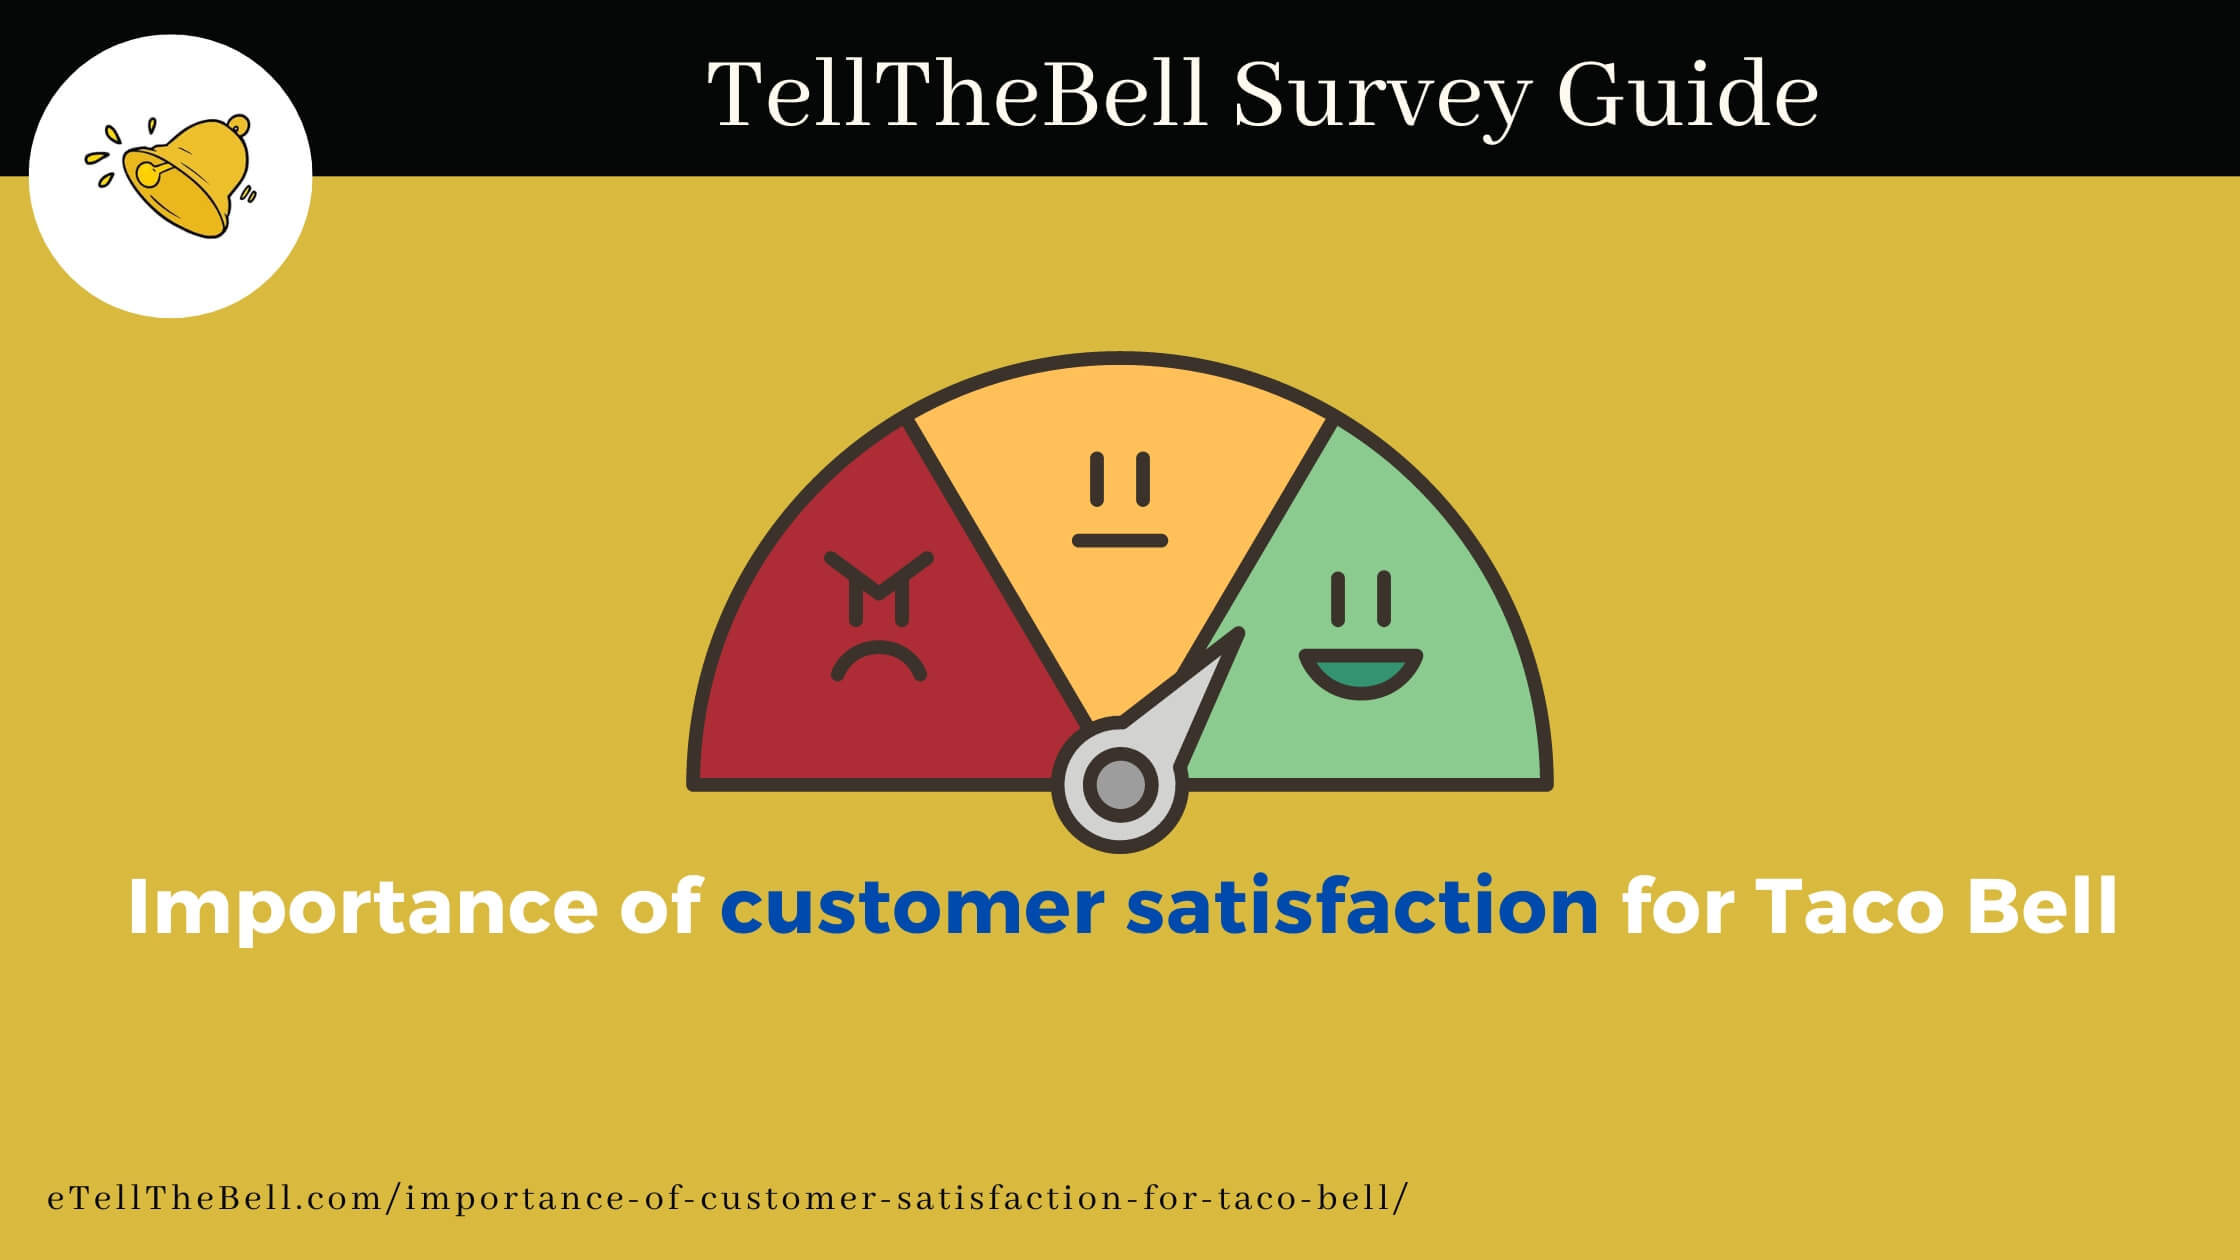 Importance of customer satisfaction for Taco Bell